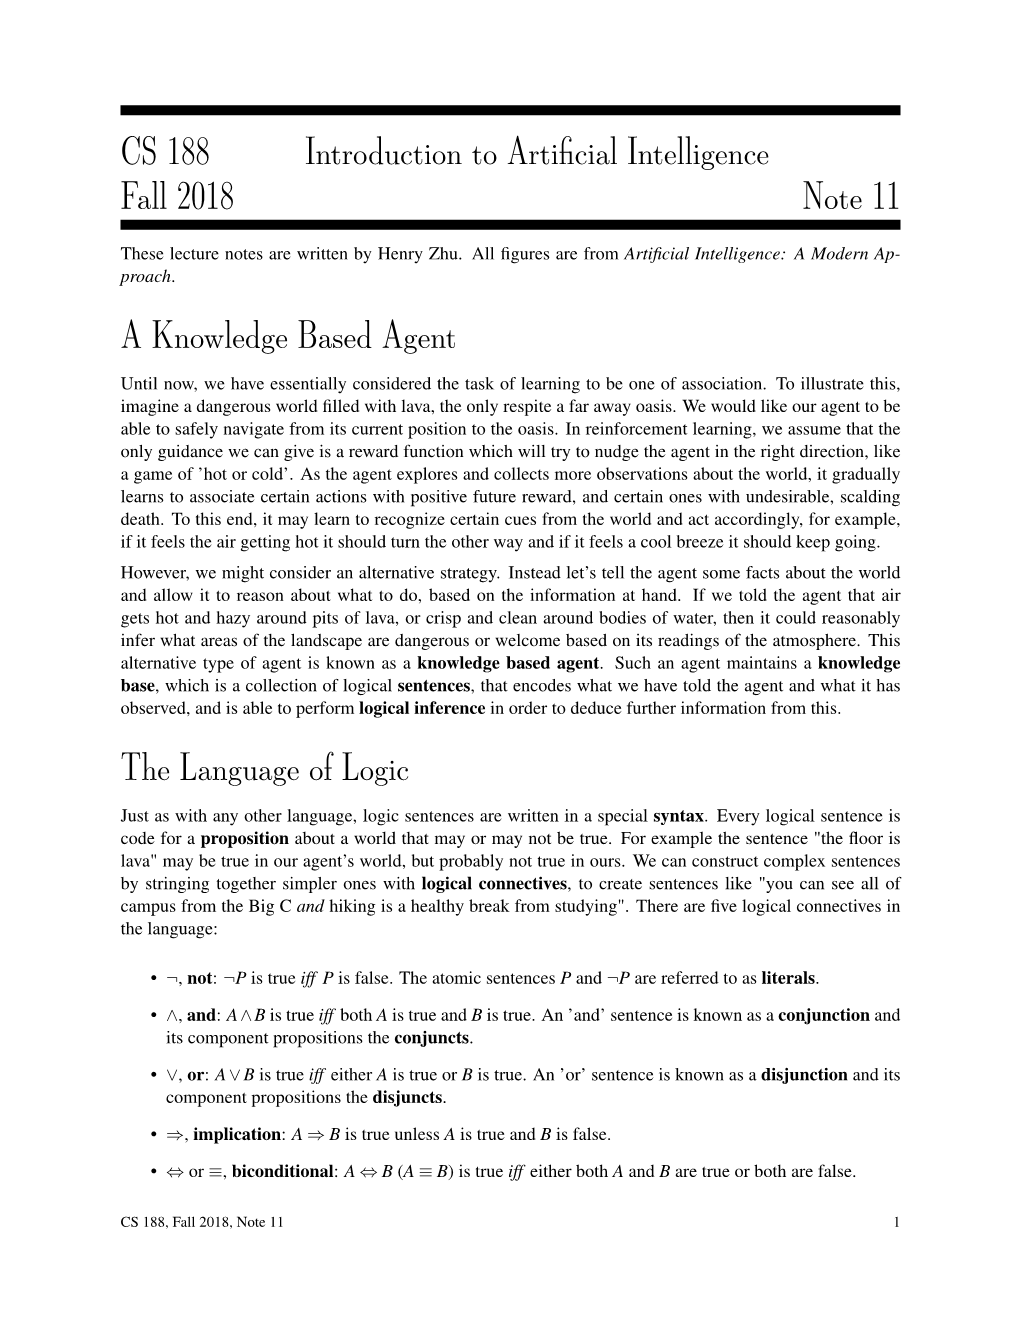 CS 188 Introduction to Artificial Intelligence Fall 2018 Note 11 a Knowledge Based Agent the Language of Logic